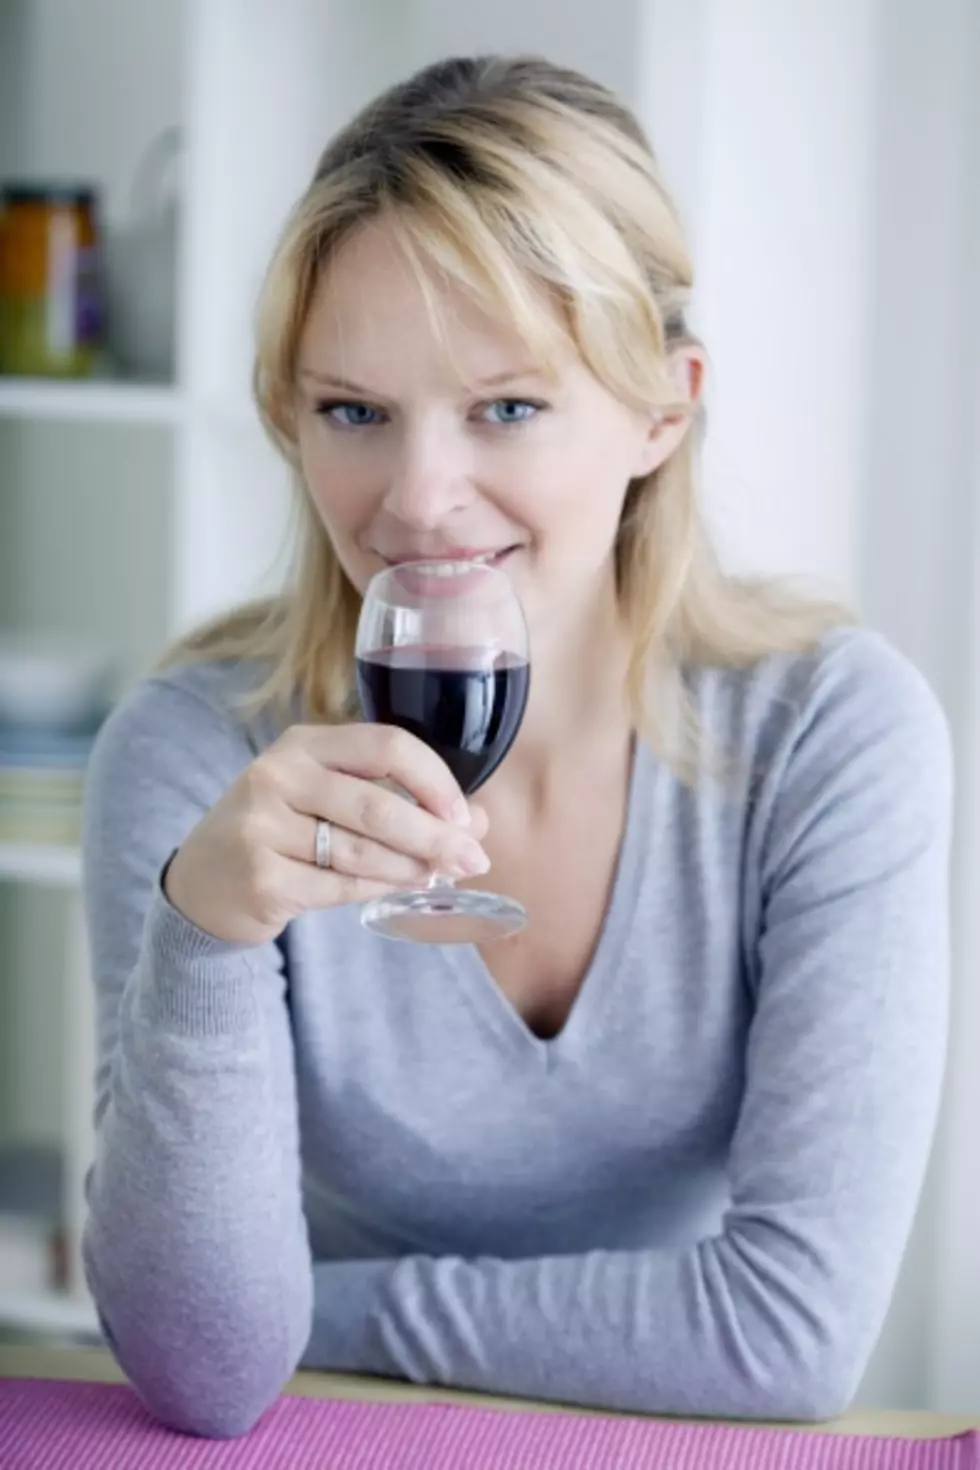 Study: Drinking Glass of Red Wine The Same As Getting An Hour of Exercise?